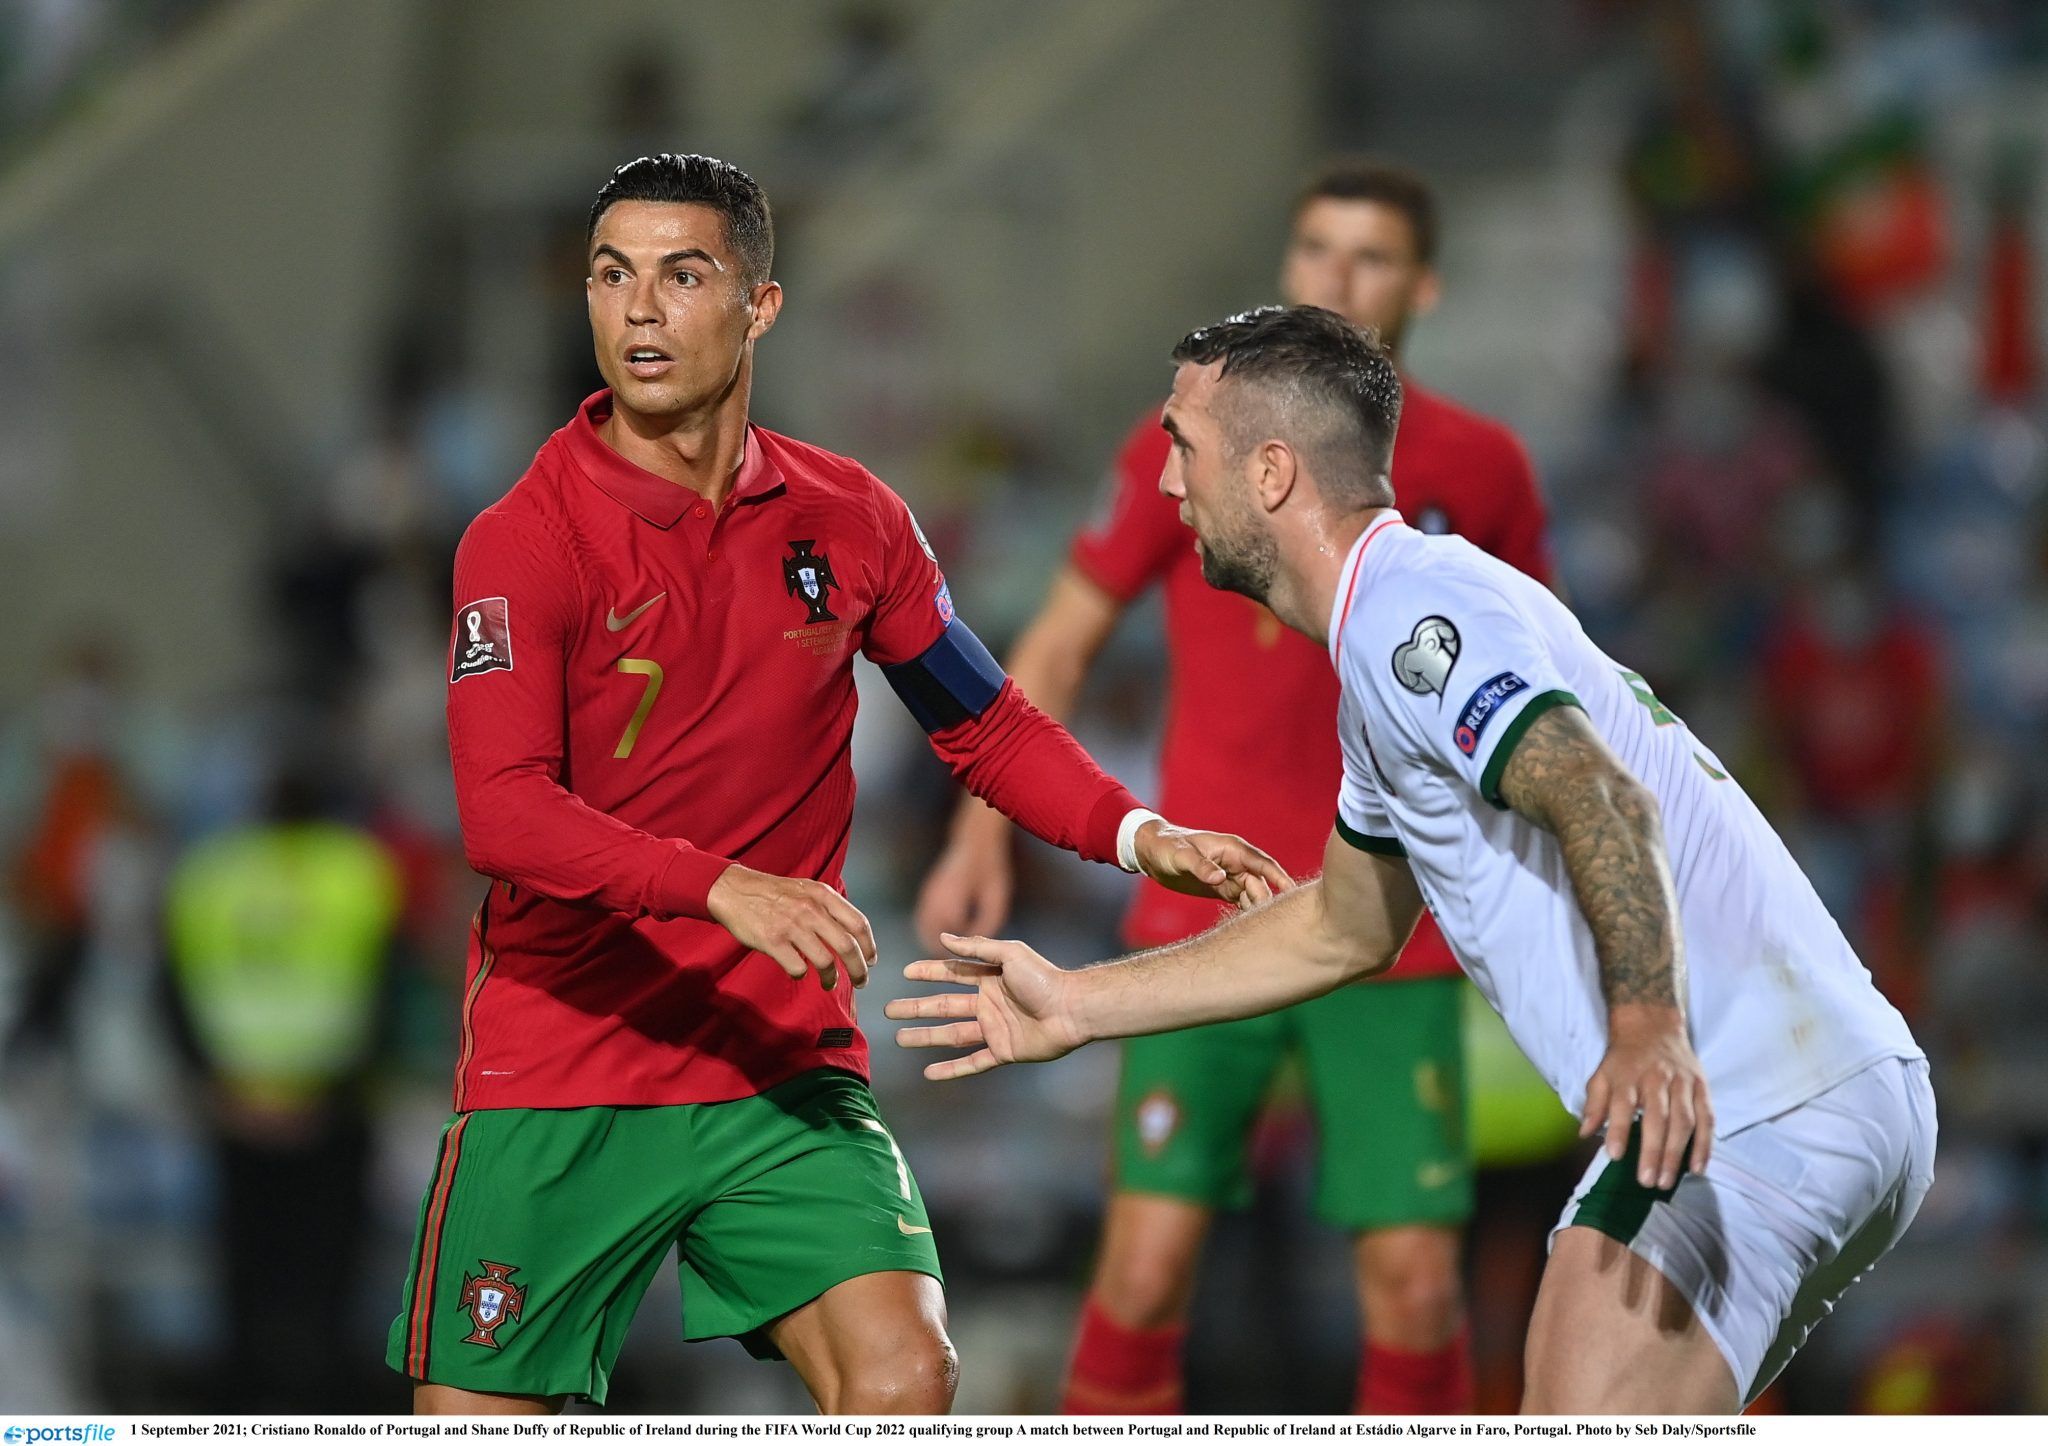 Ireland v Portugal: What TV channel is the game on? | SportsJOE.ie